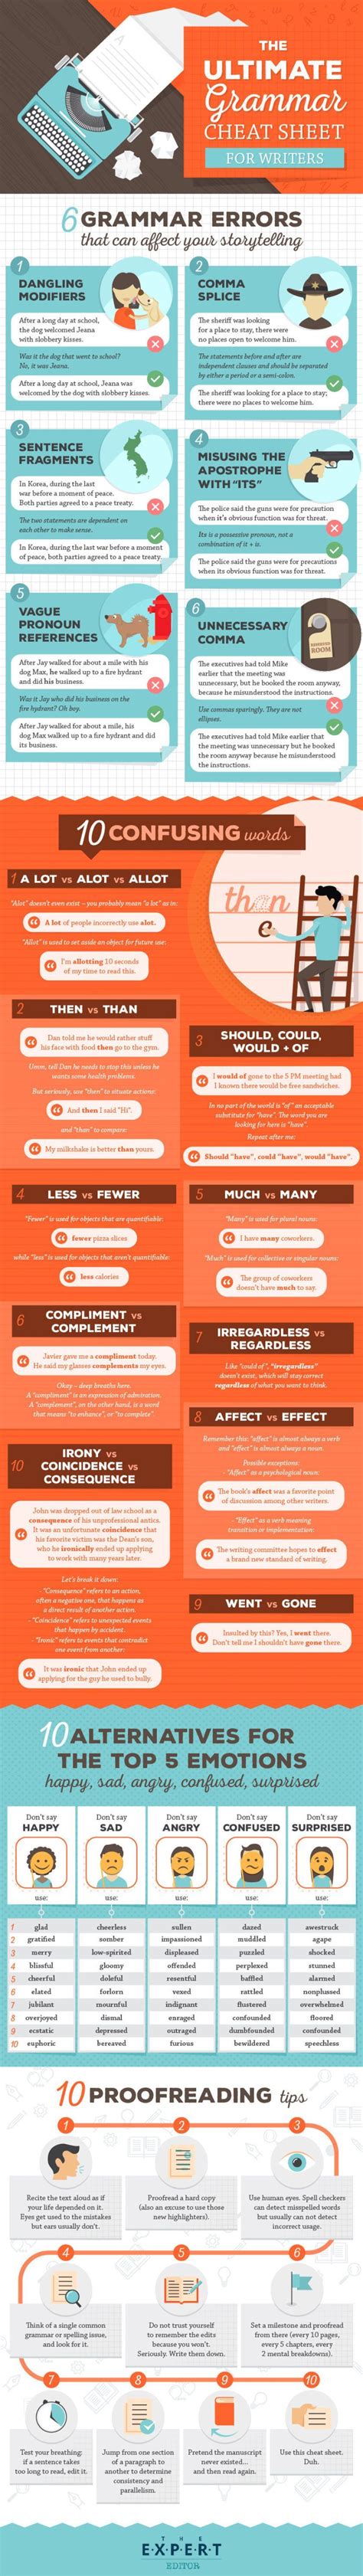 The Ultimate Revision Cheat Sheet Infographic E Learn